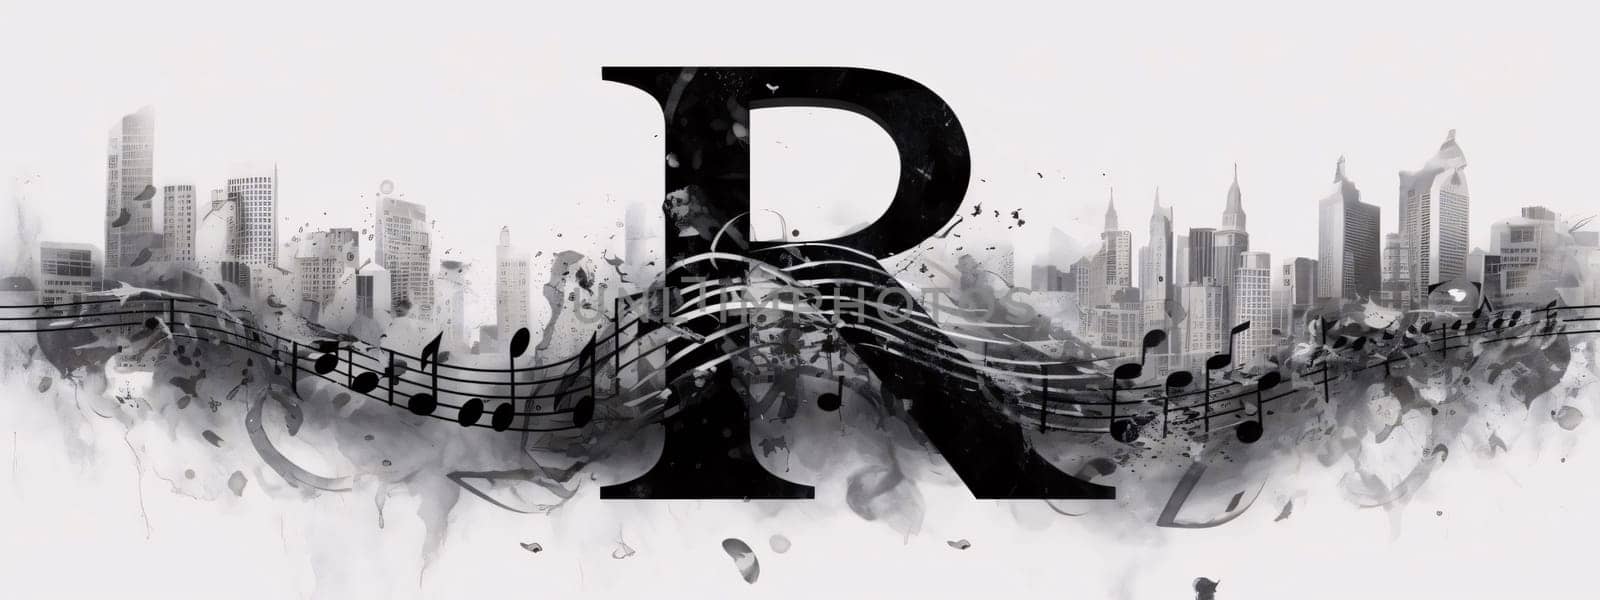 Abstract musical background. Black and white illustration with musical notes and city letter R by ThemesS